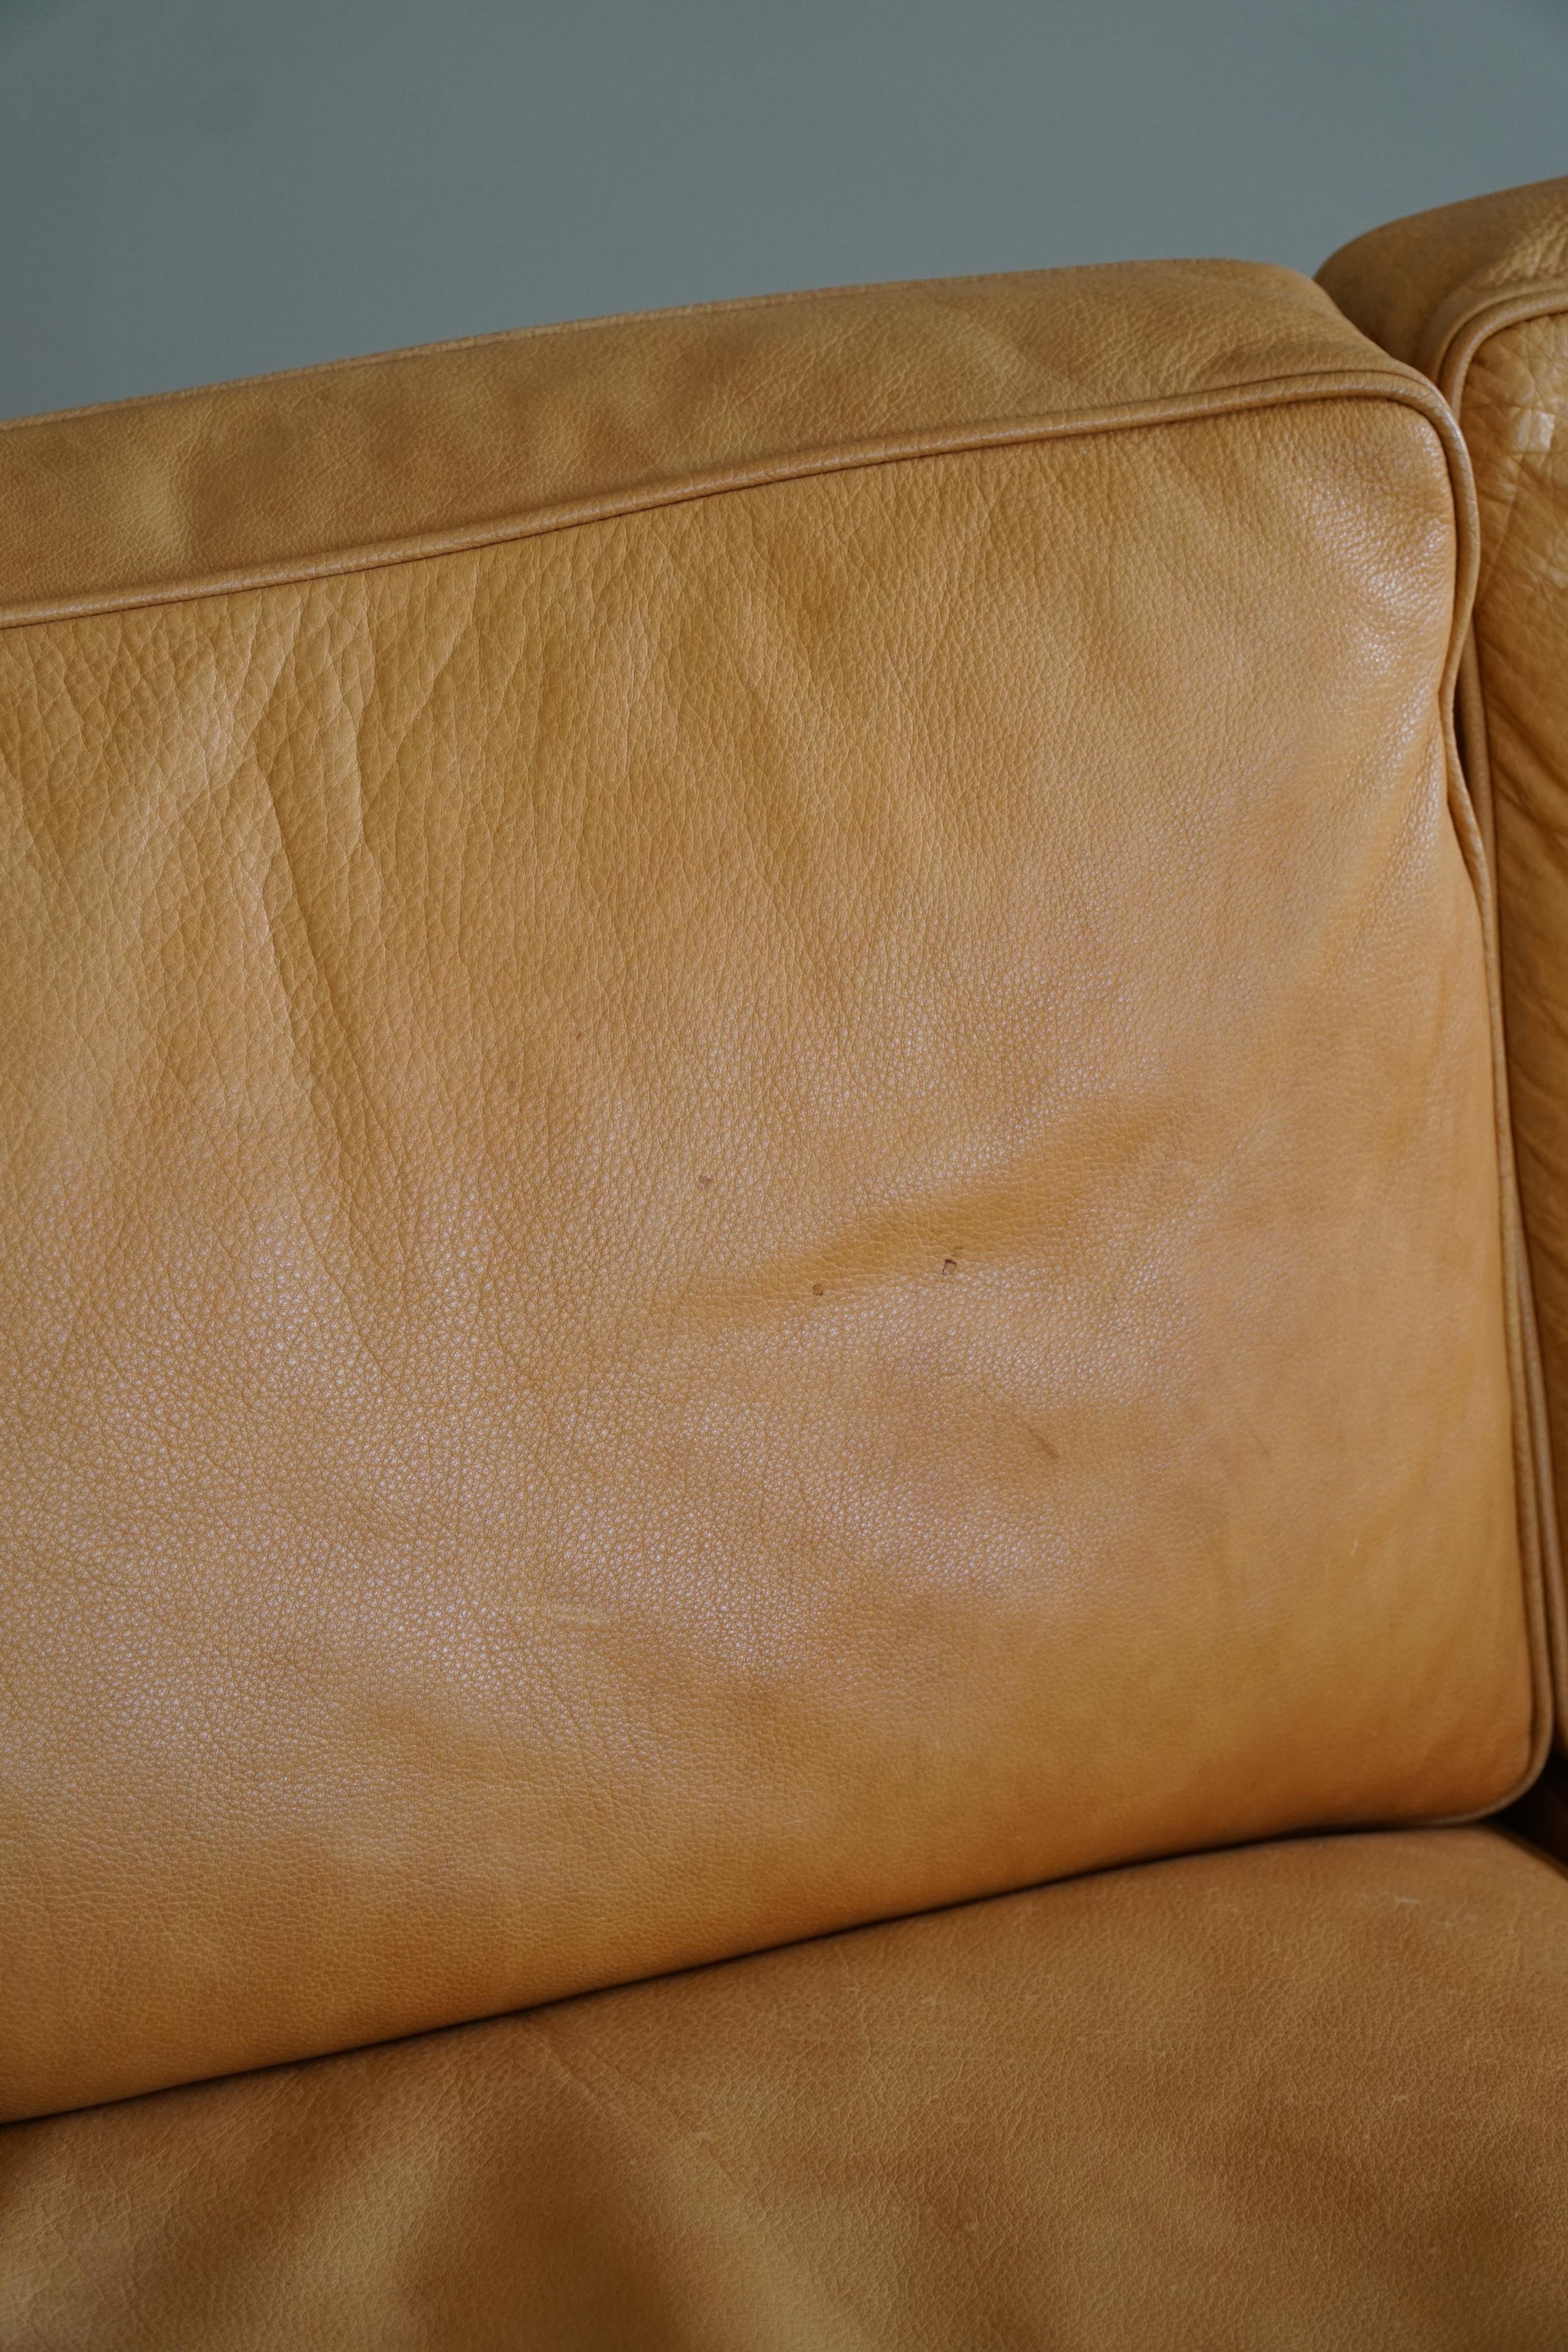 Danish Midcentury Stouby 3-Seater Sofa in Cognac Brown Leather, Made in 1970s For Sale 8